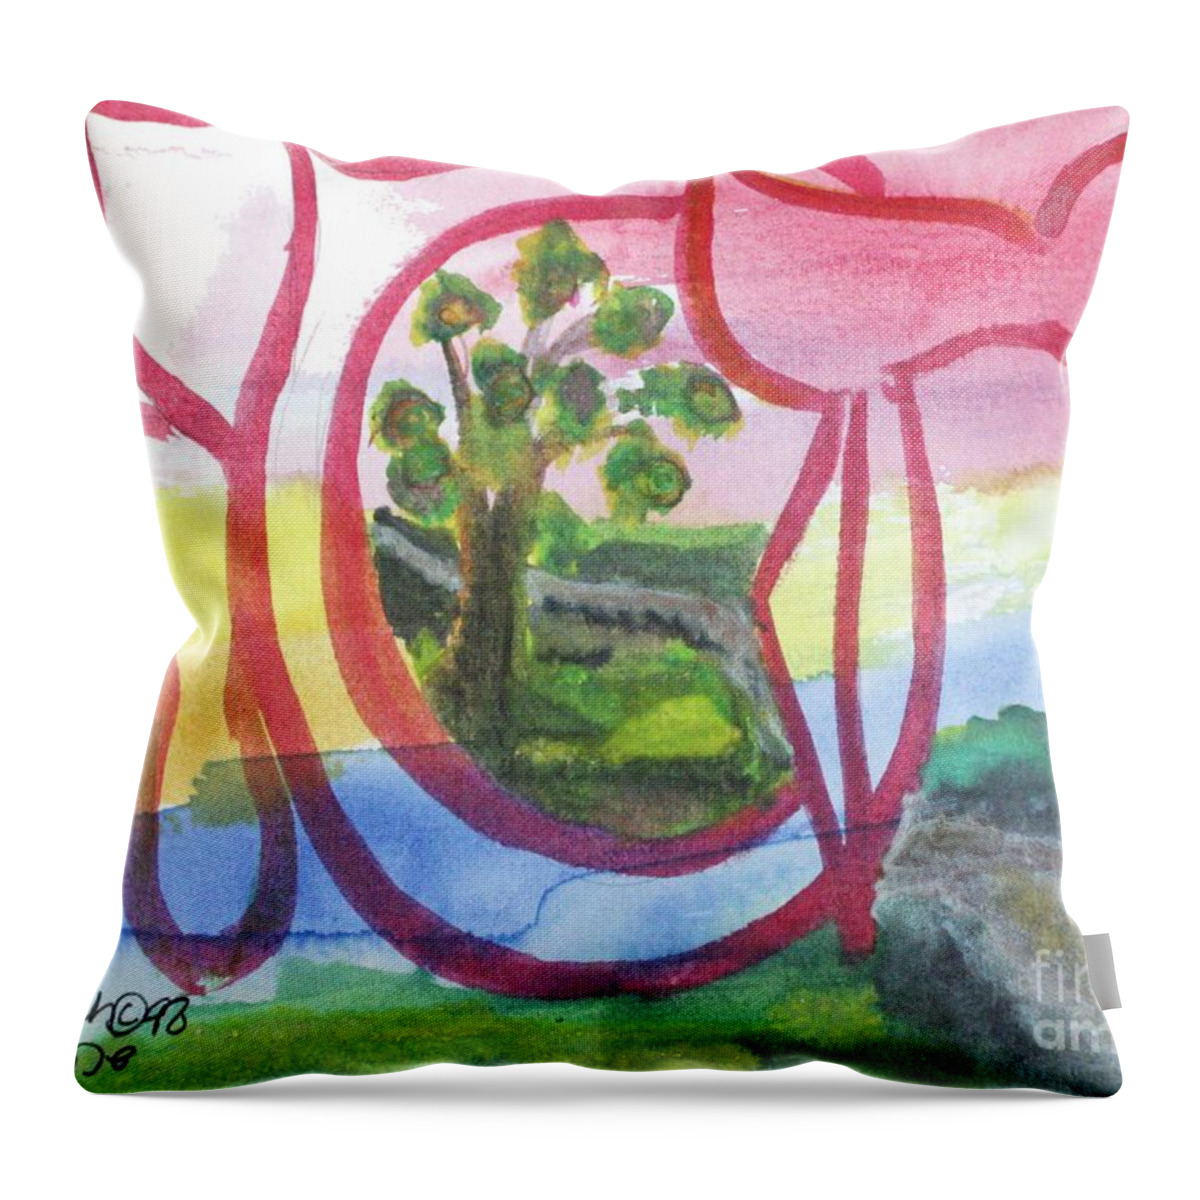 Hasia Chasia Chasia Chasiah Chasyah Chasiah Chasiya Throw Pillow featuring the painting HASIA CHASYA nf1-106 by Hebrewletters SL